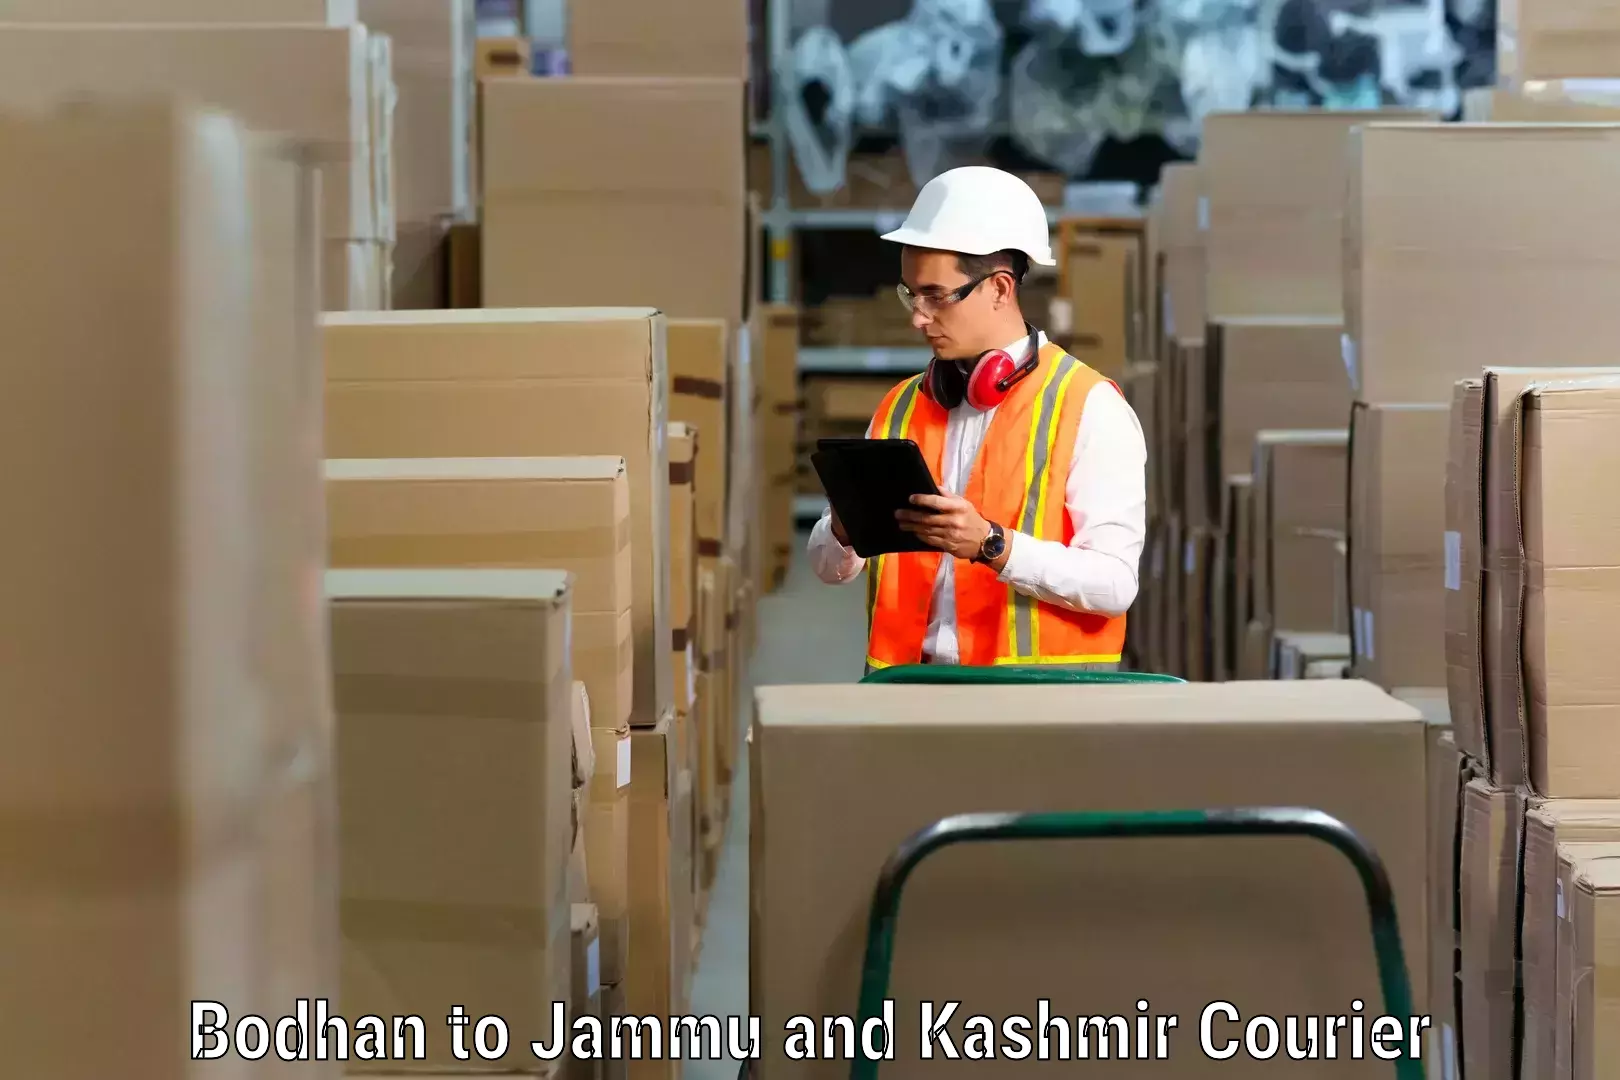 Furniture delivery service Bodhan to Jammu and Kashmir